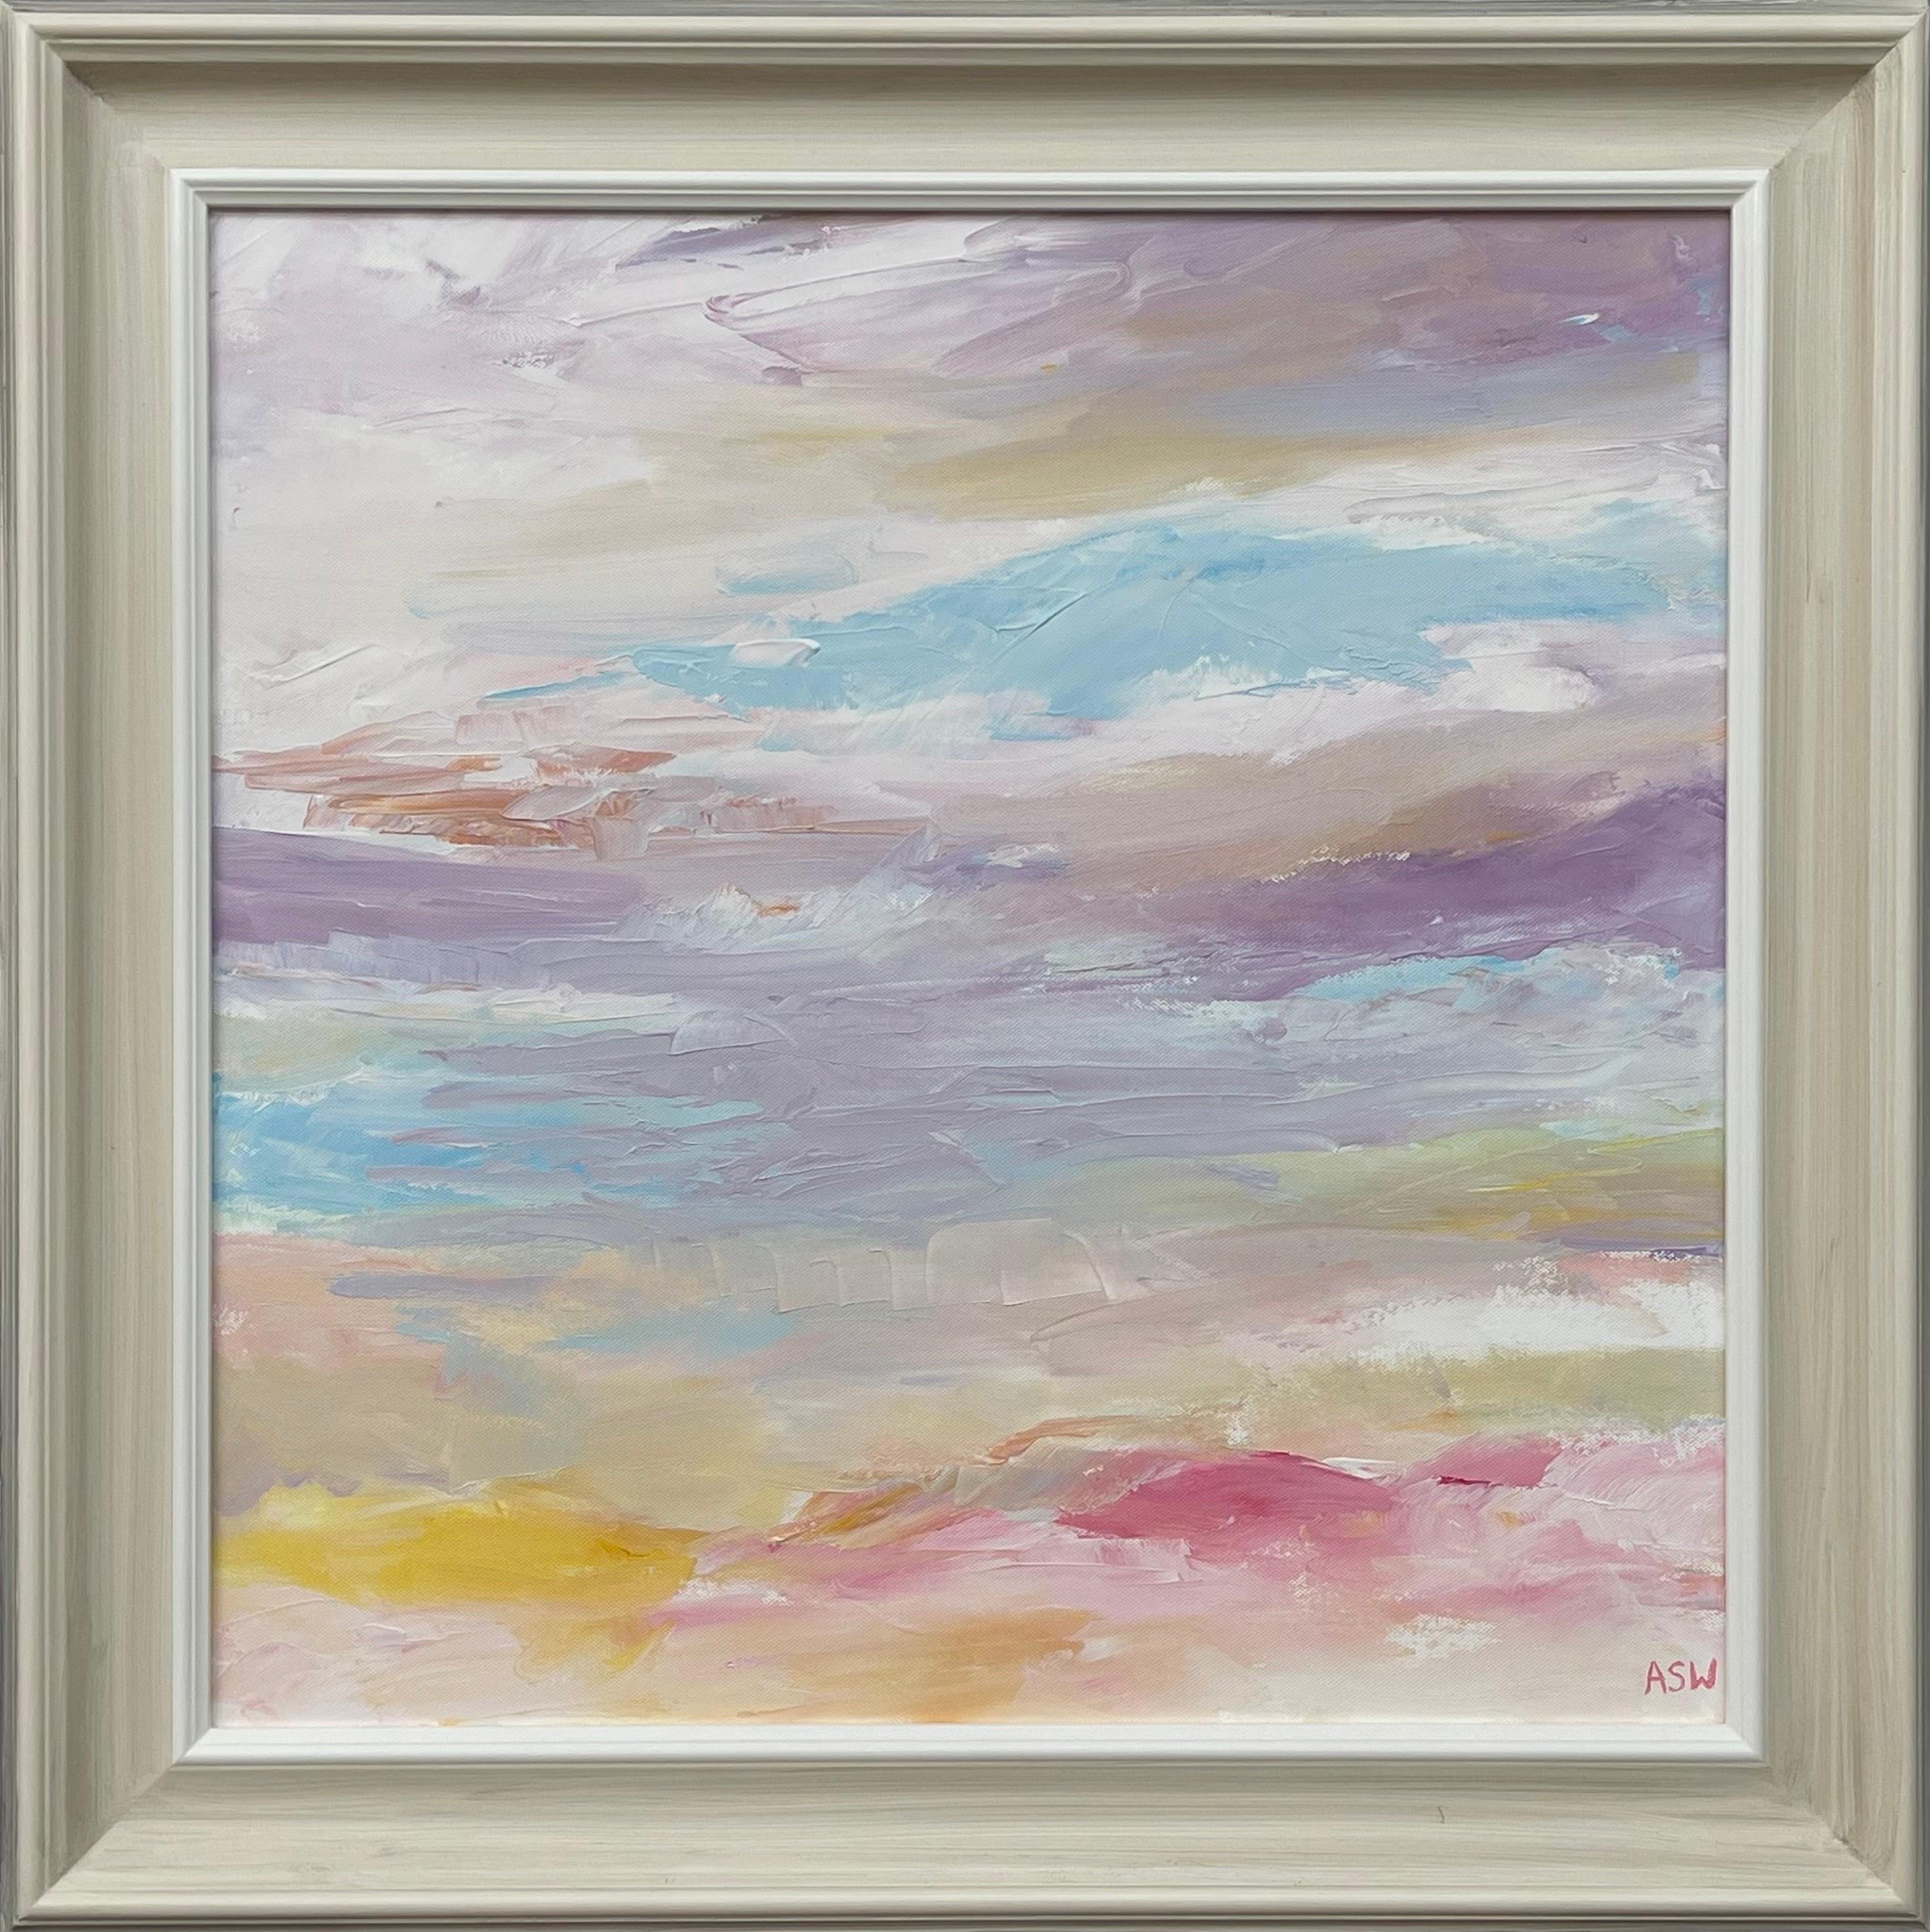 Angela Wakefield Landscape Painting - Serene Abstract Impressionist Seascape Landscape by Contemporary British Artist